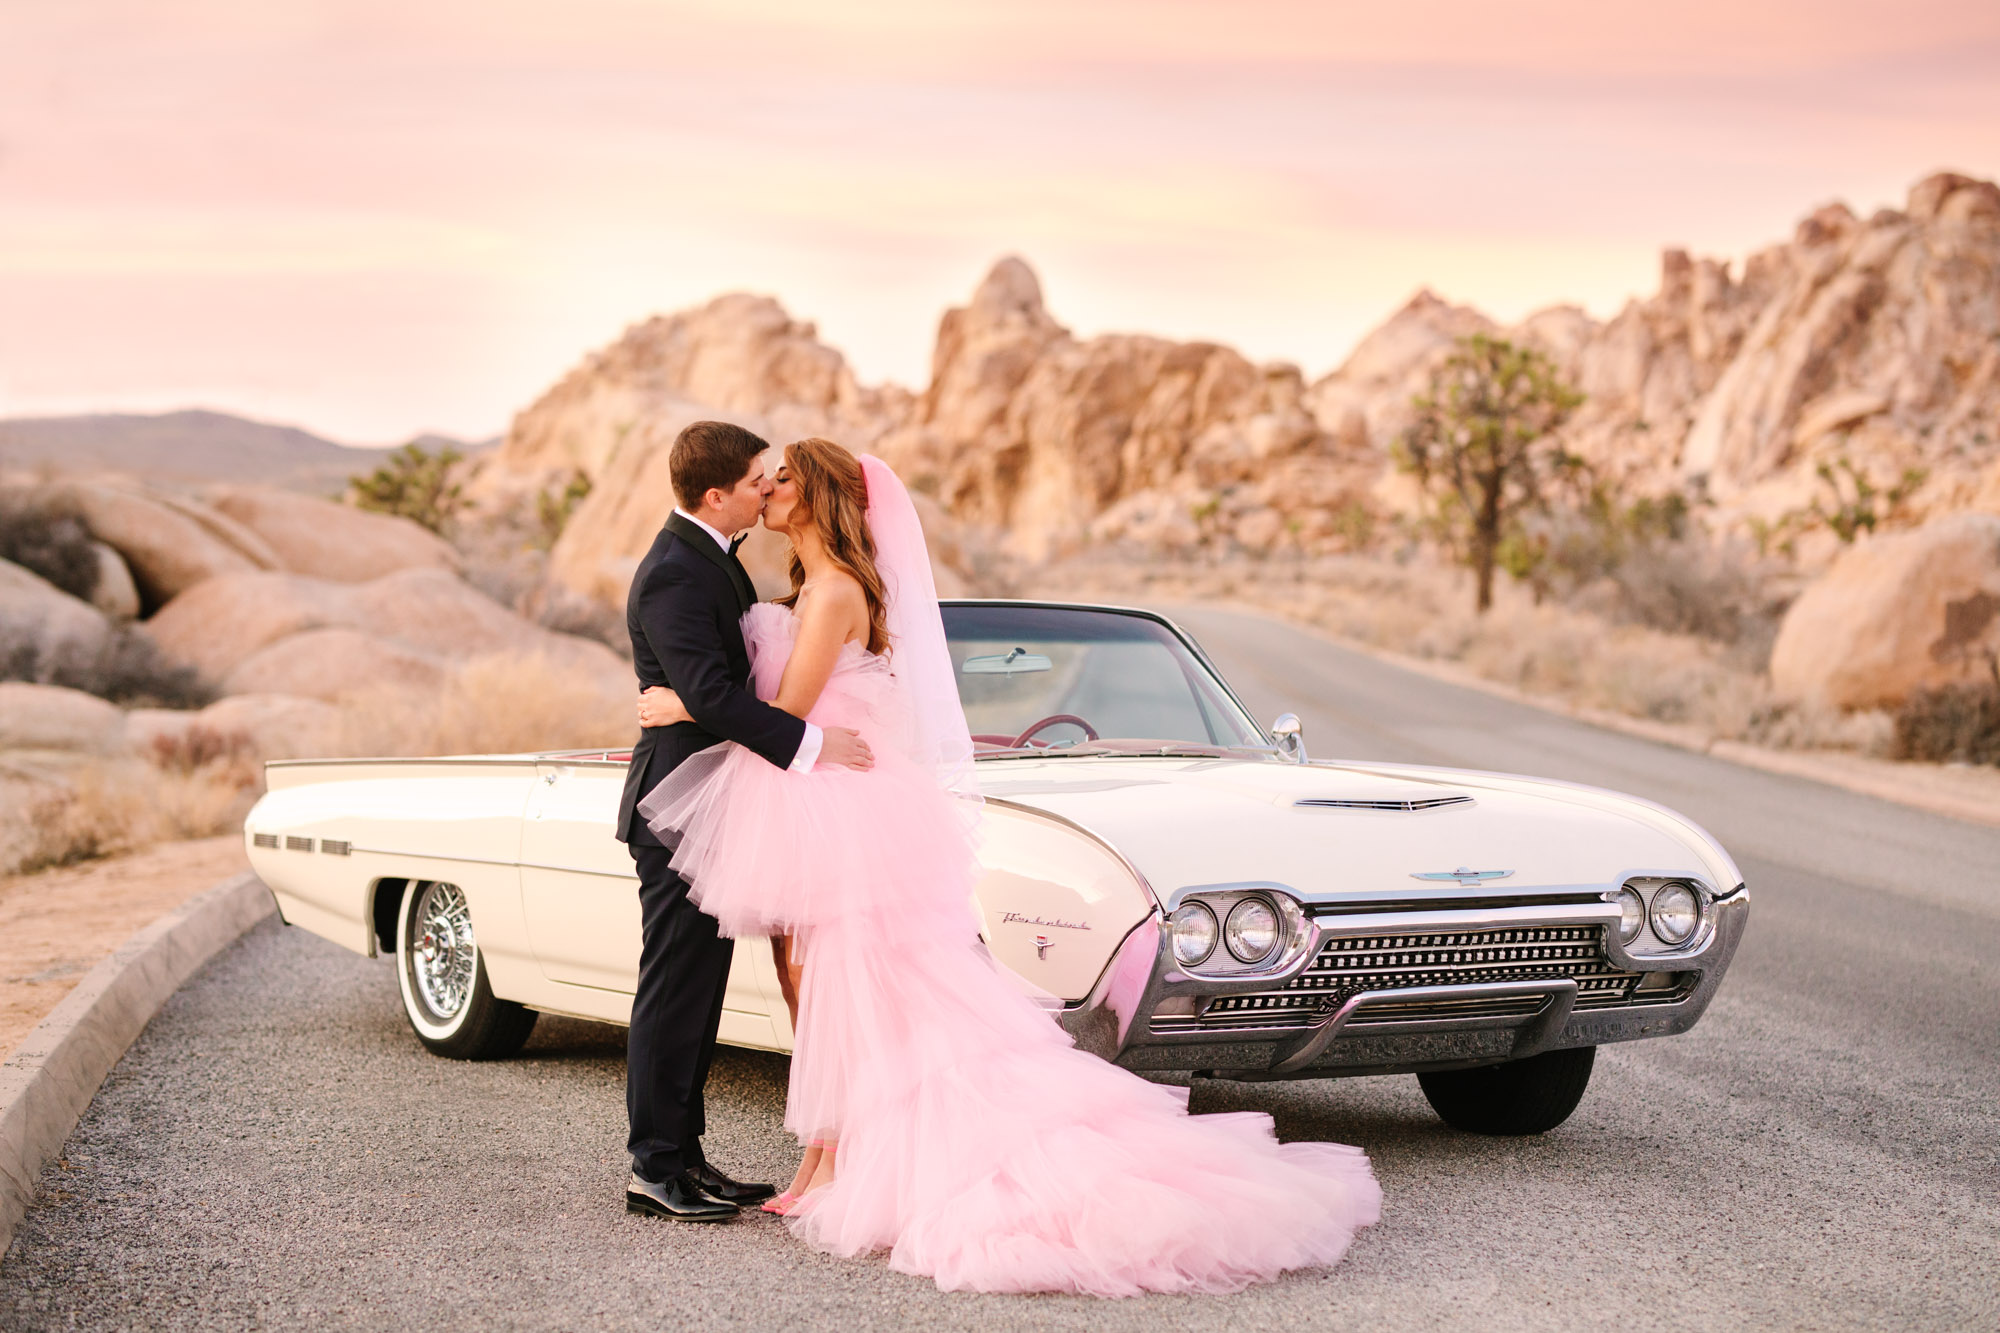 Bride and groom kissing in front of white classic convertible car | Pink wedding dress Joshua Tree elopement featured on Green Wedding Shoes | Colorful desert wedding inspiration for fun-loving couples in Southern California #joshuatreewedding #joshuatreeelopement #pinkwedding #greenweddingshoes Source: Mary Costa Photography | Los Angeles